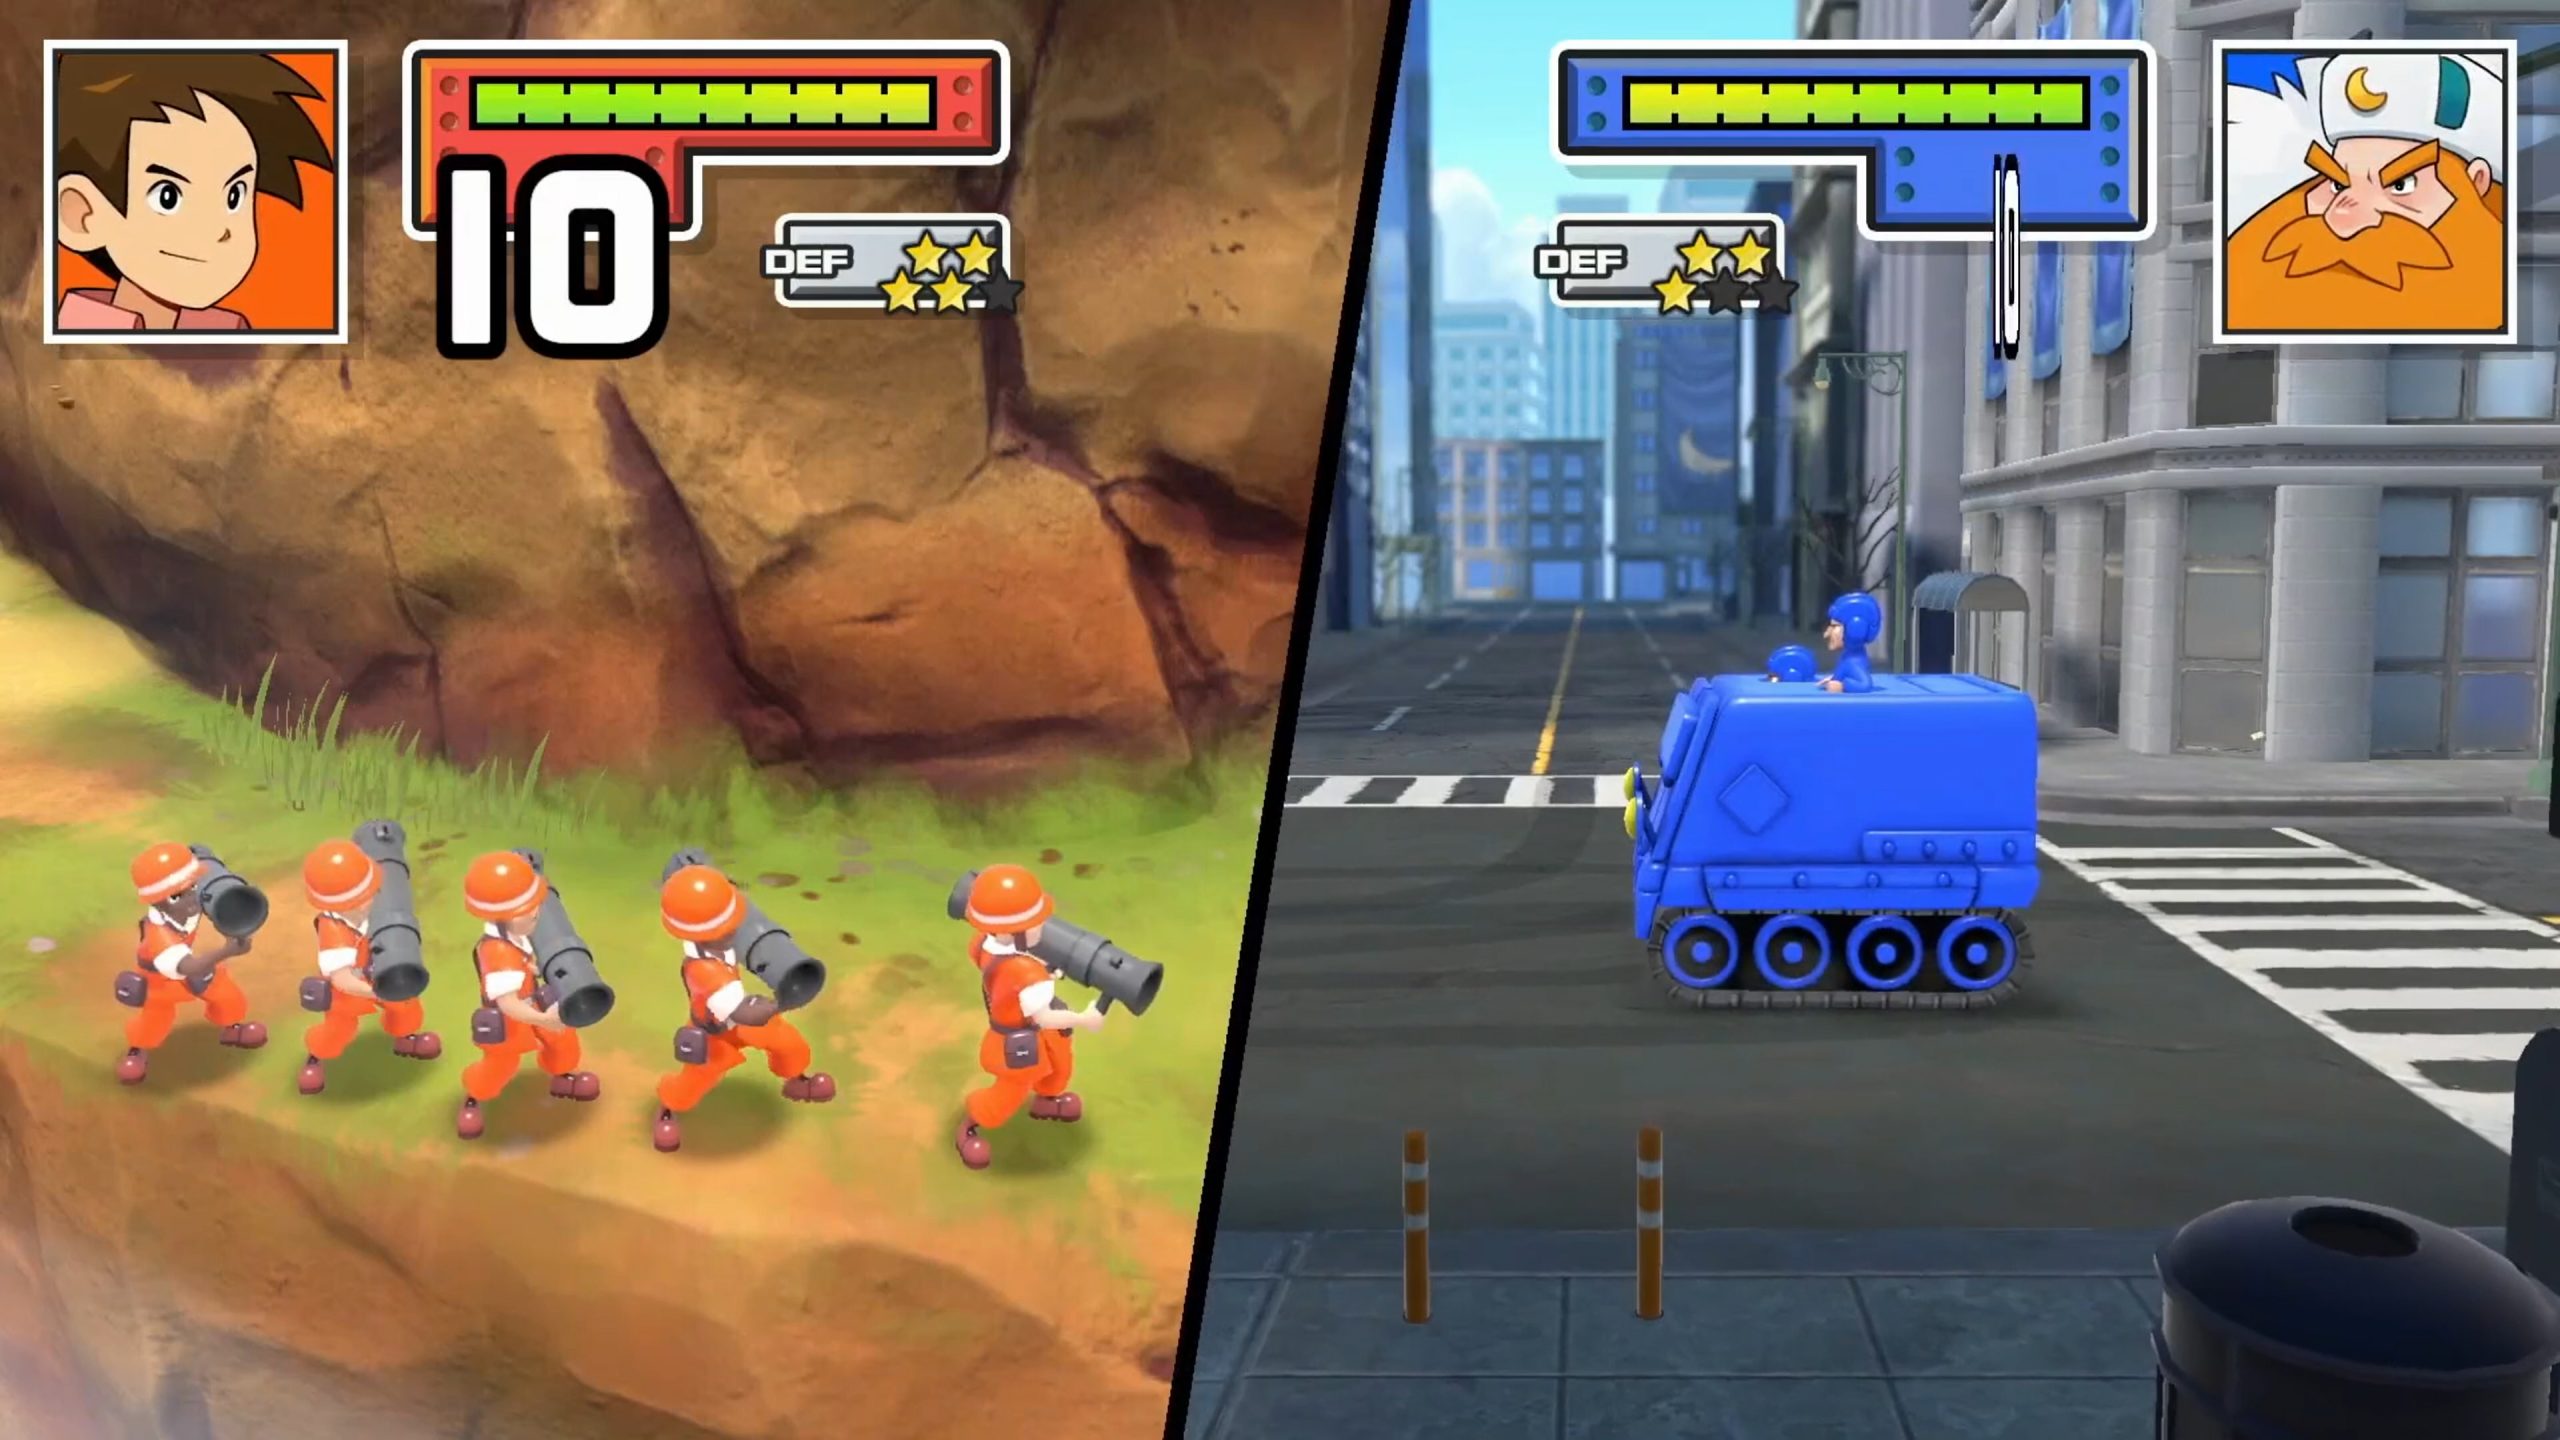 advance-wars-1-2-re-boot-camp-announced-for-switch